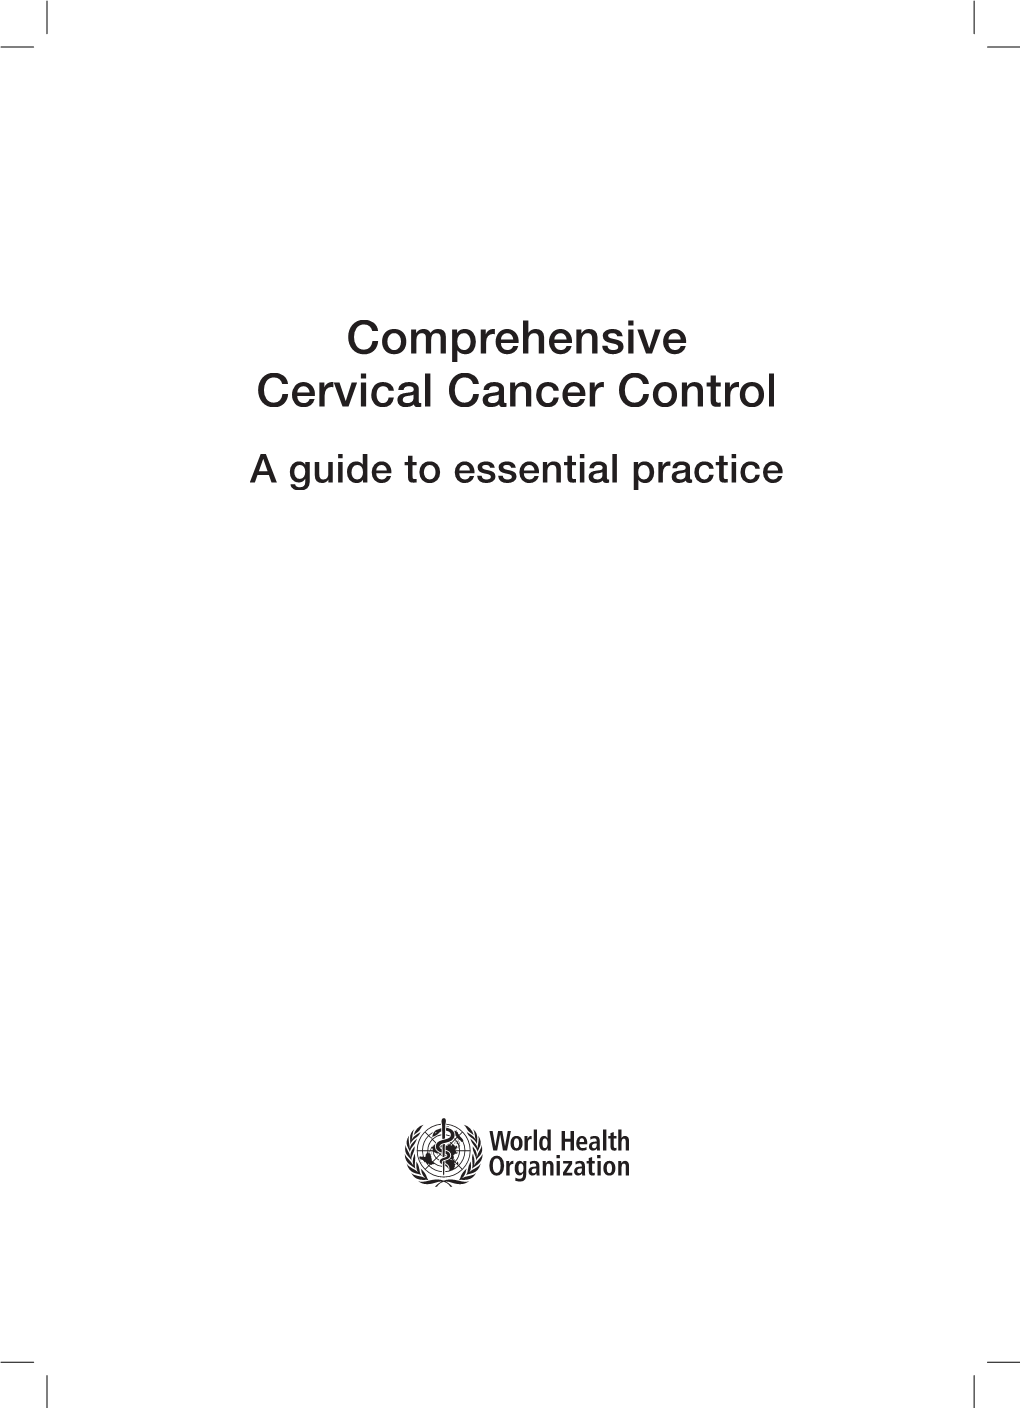 Comprehensive Cervical Cancer Control: a Guide to Essential Practice